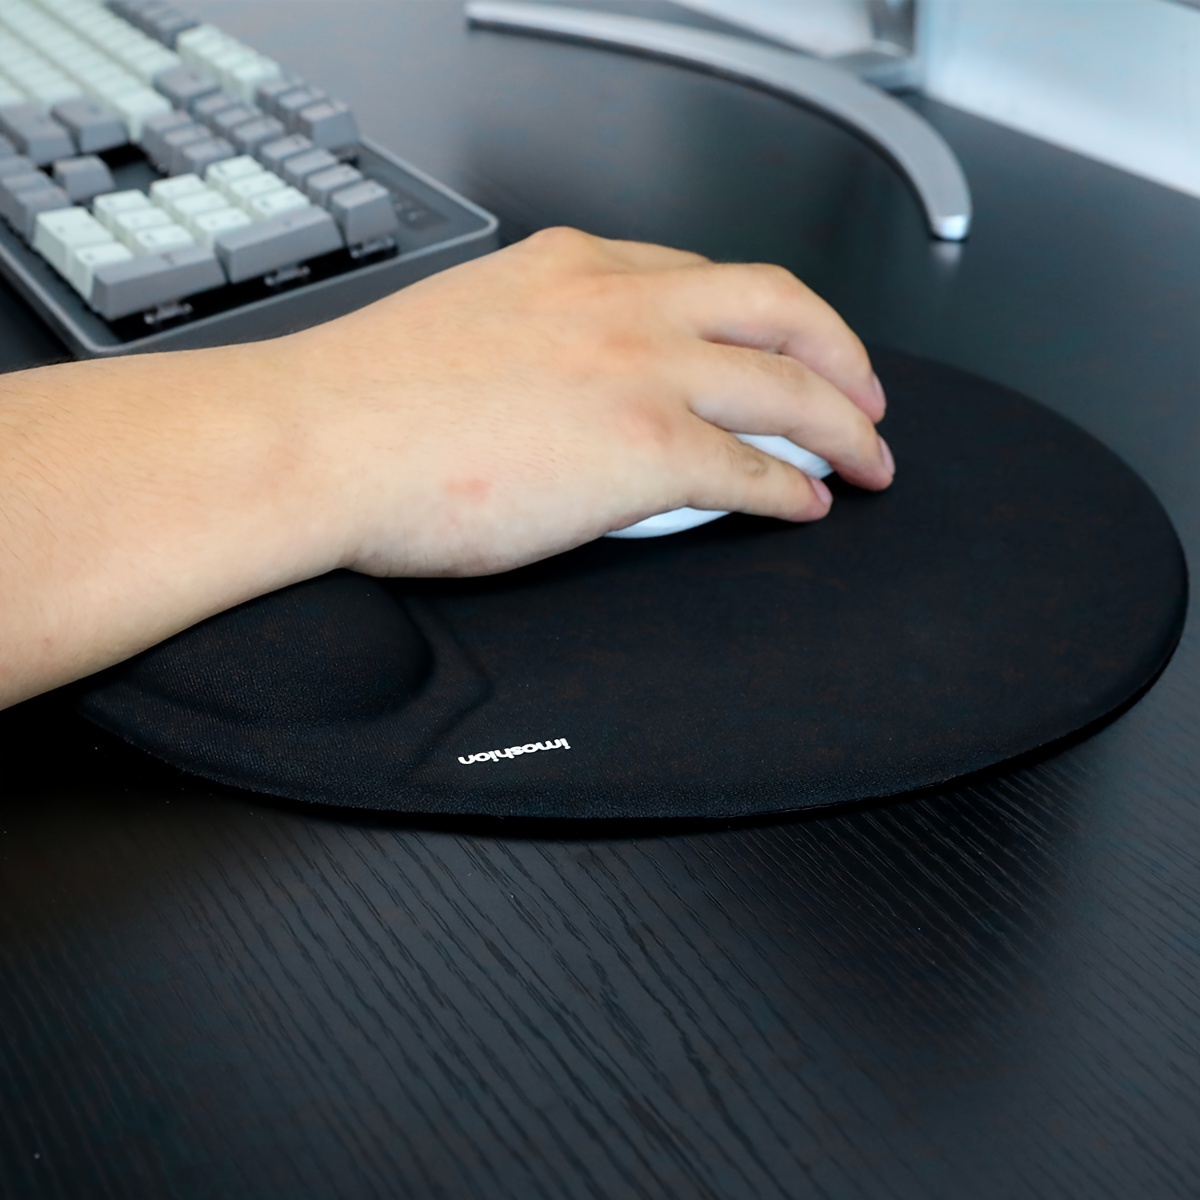 Mouse Pad Ergonomic With Gel Comfort Wrist Rest Support, Gaming Mouse Pad  With Lycra Cloth Nonslip